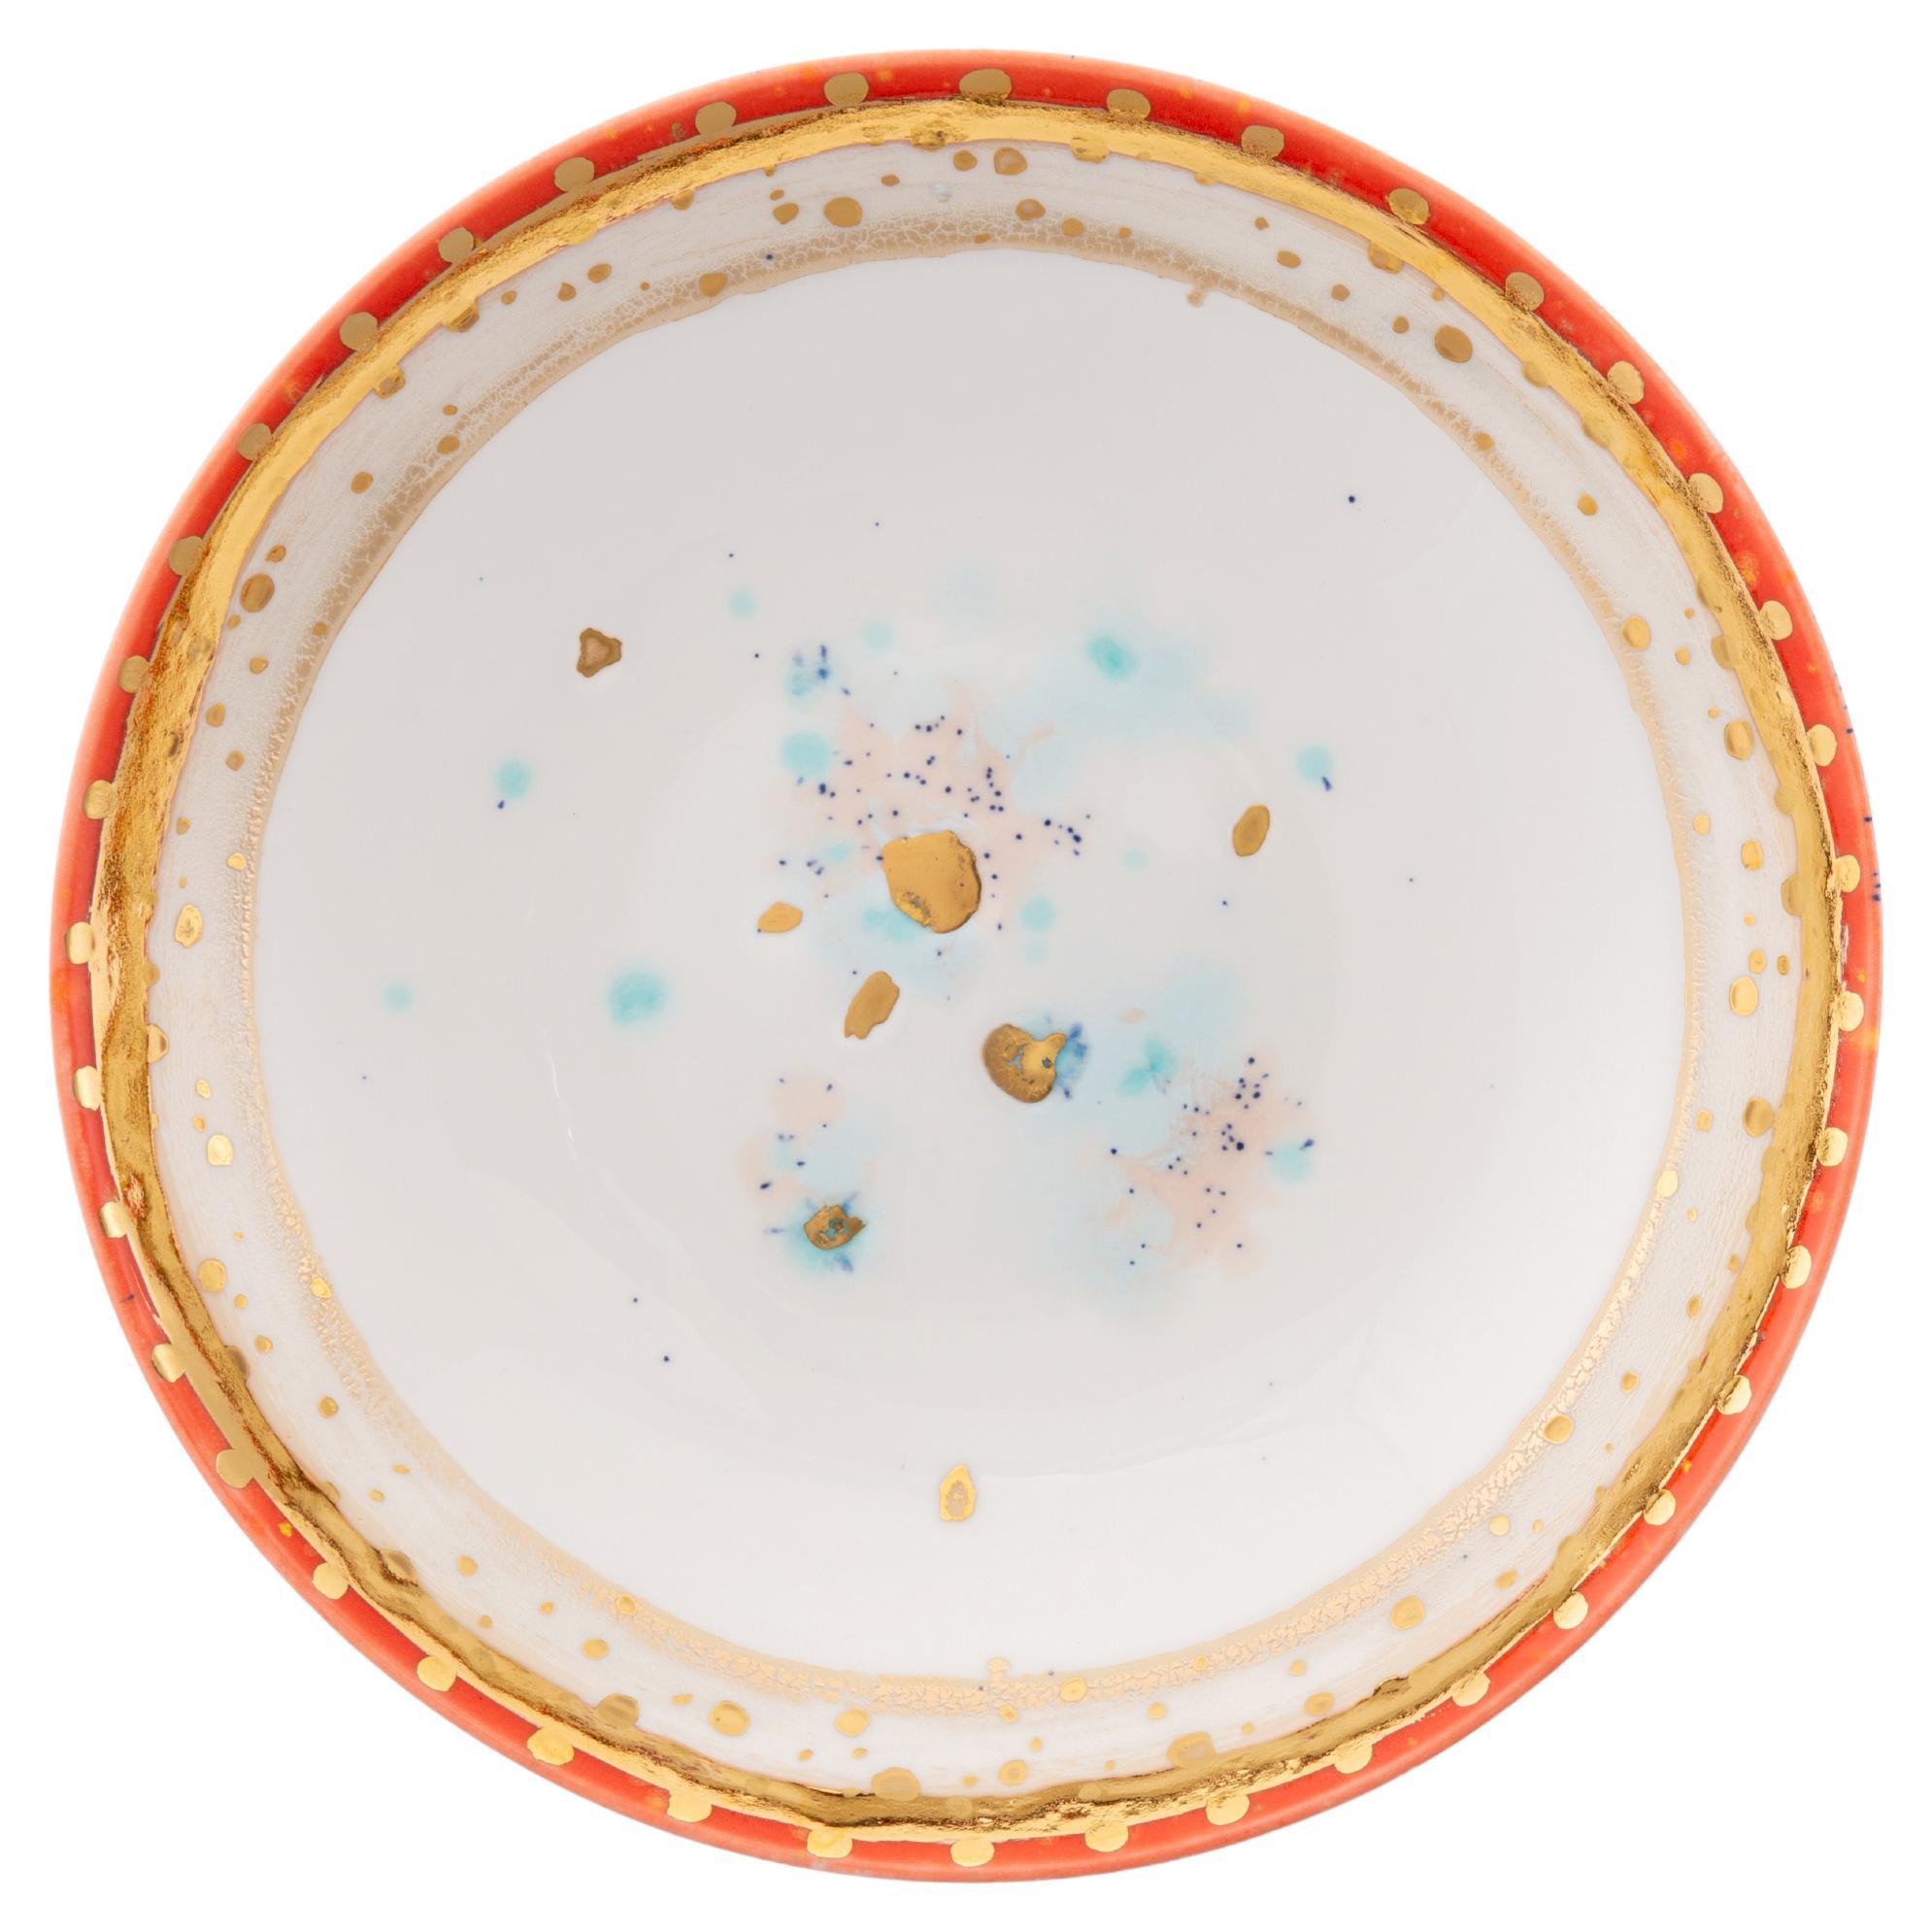 Contemporary Set of 2 Soup Plates Gold Hand Painted Porcelain Tableware